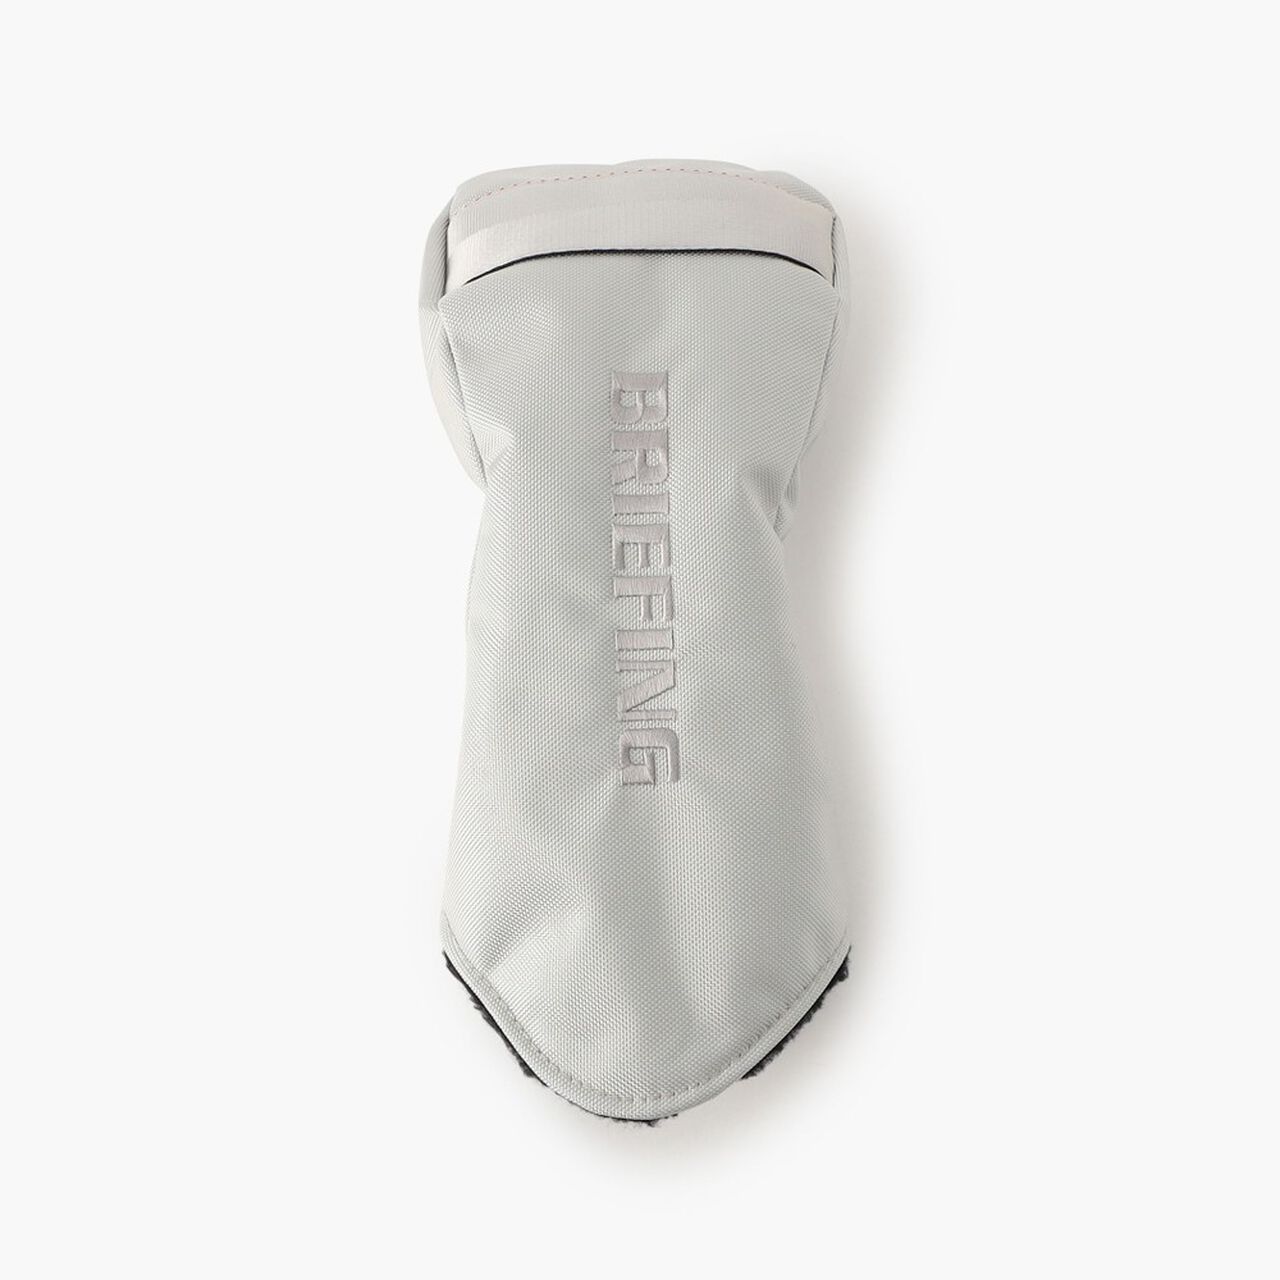 DRIVER COVER AIR-2,Silver, large image number 0